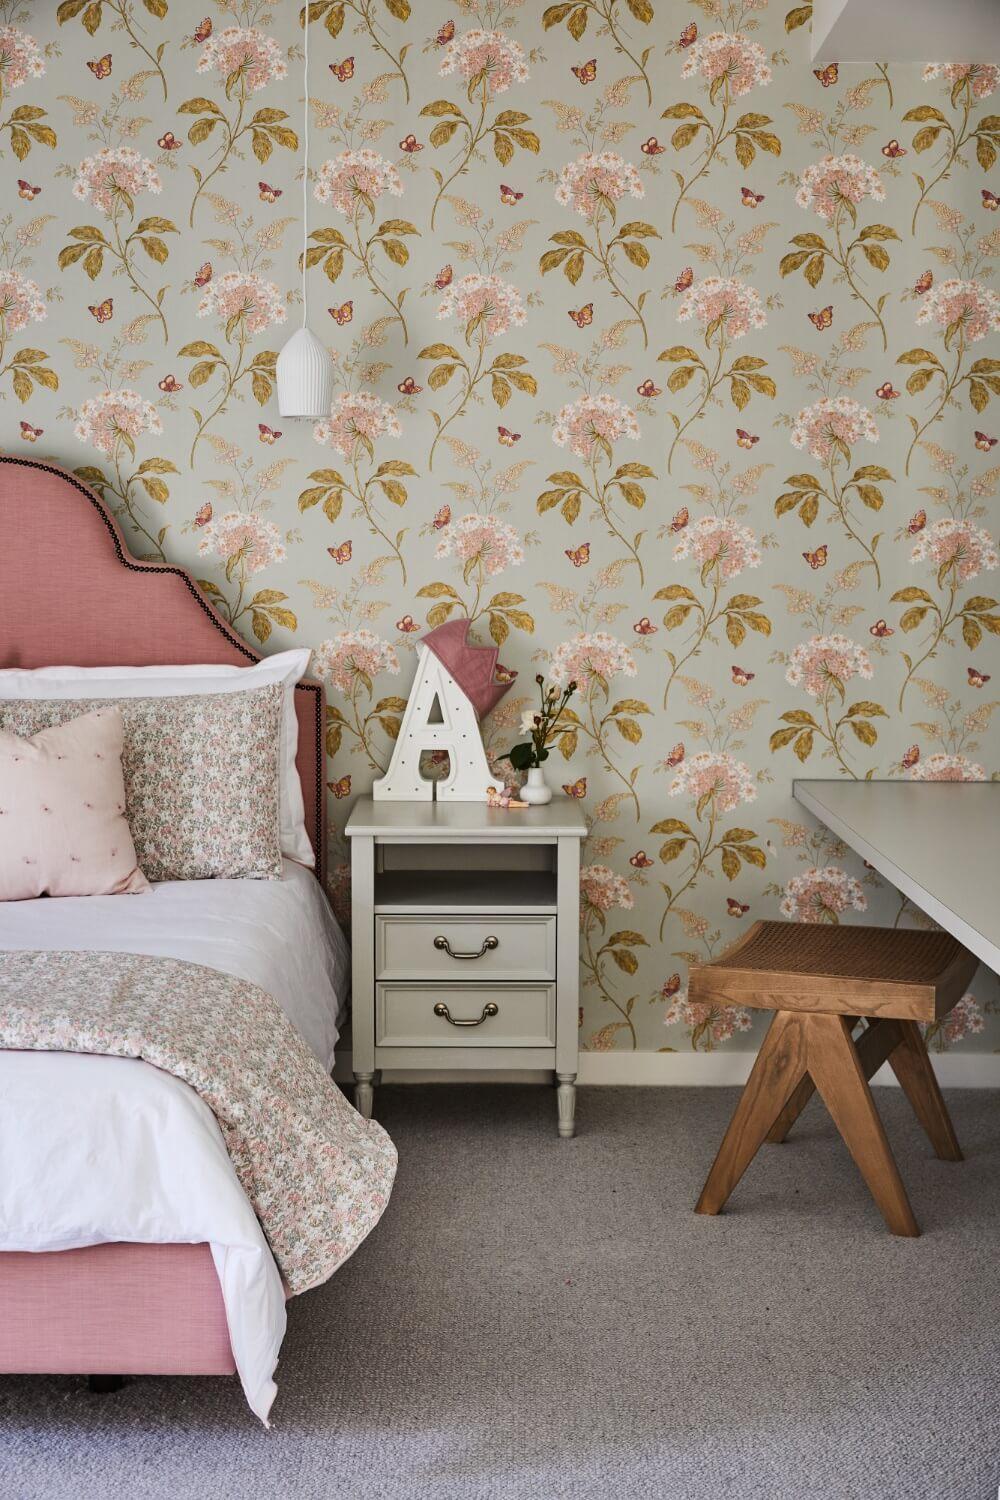 Vintage Style Furniture And Styling In Child's Bedroom